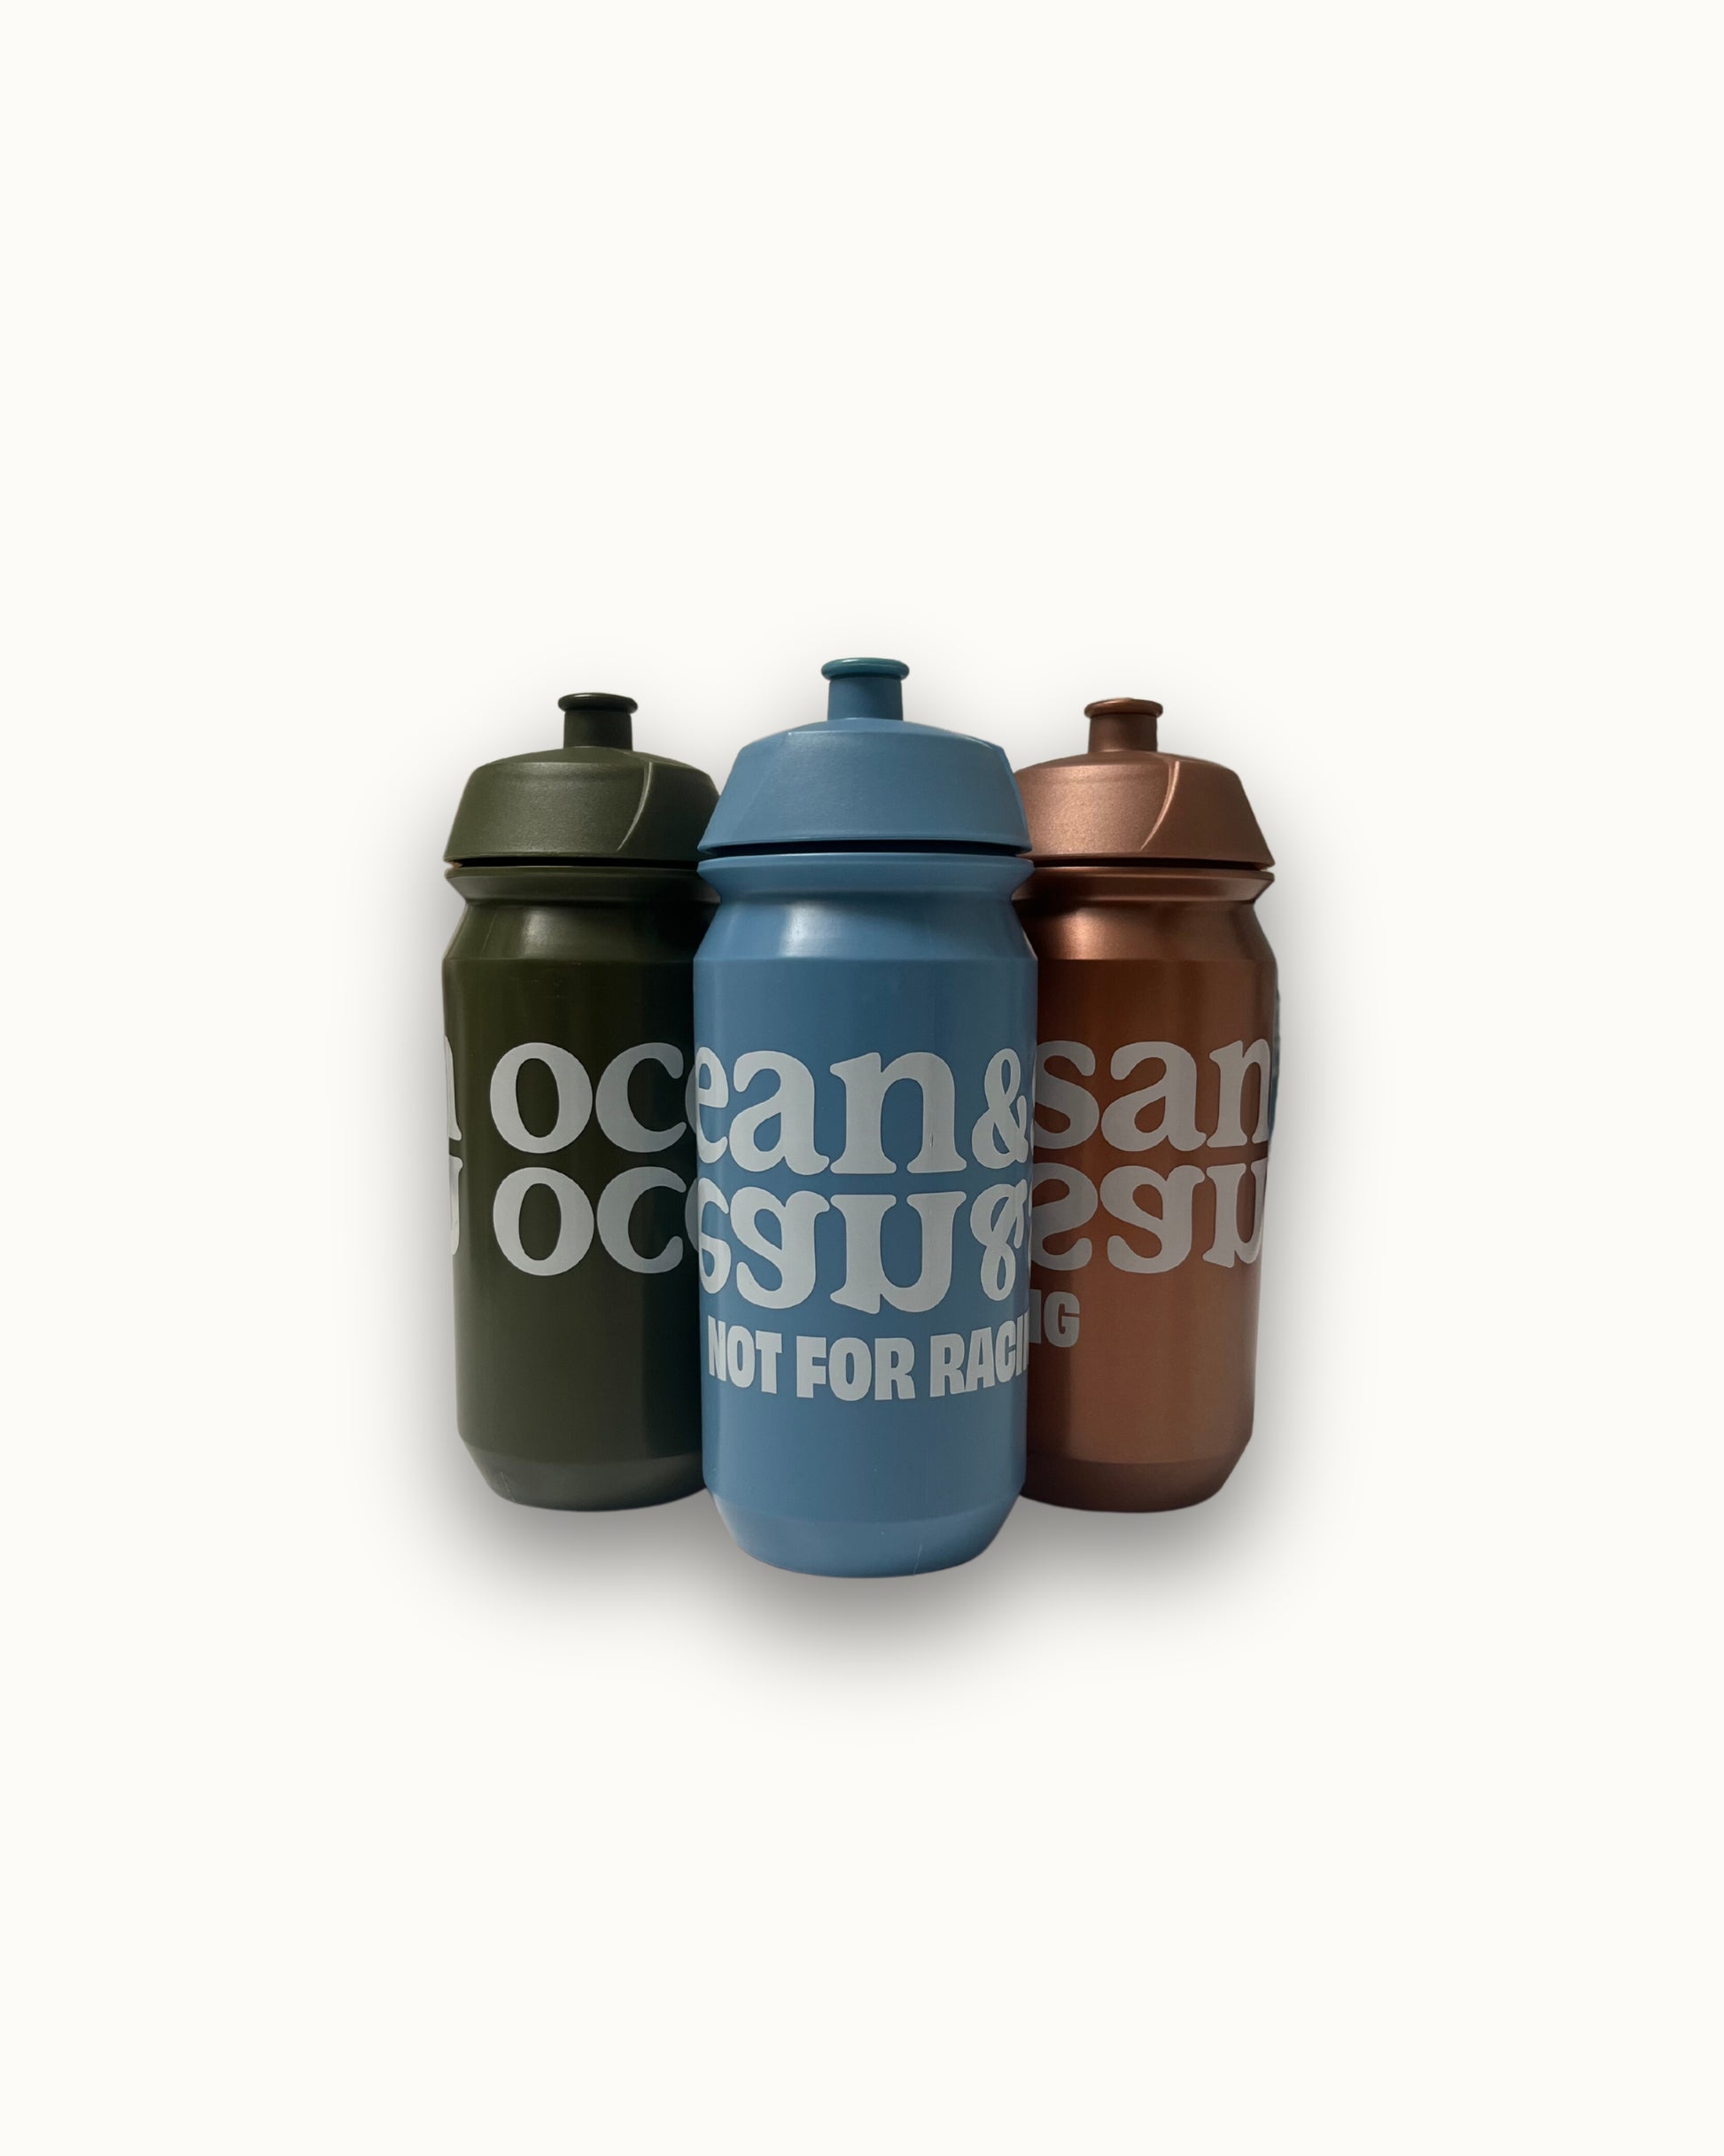 cycling water bottles, 3 bottles, three colors of cycling bottles